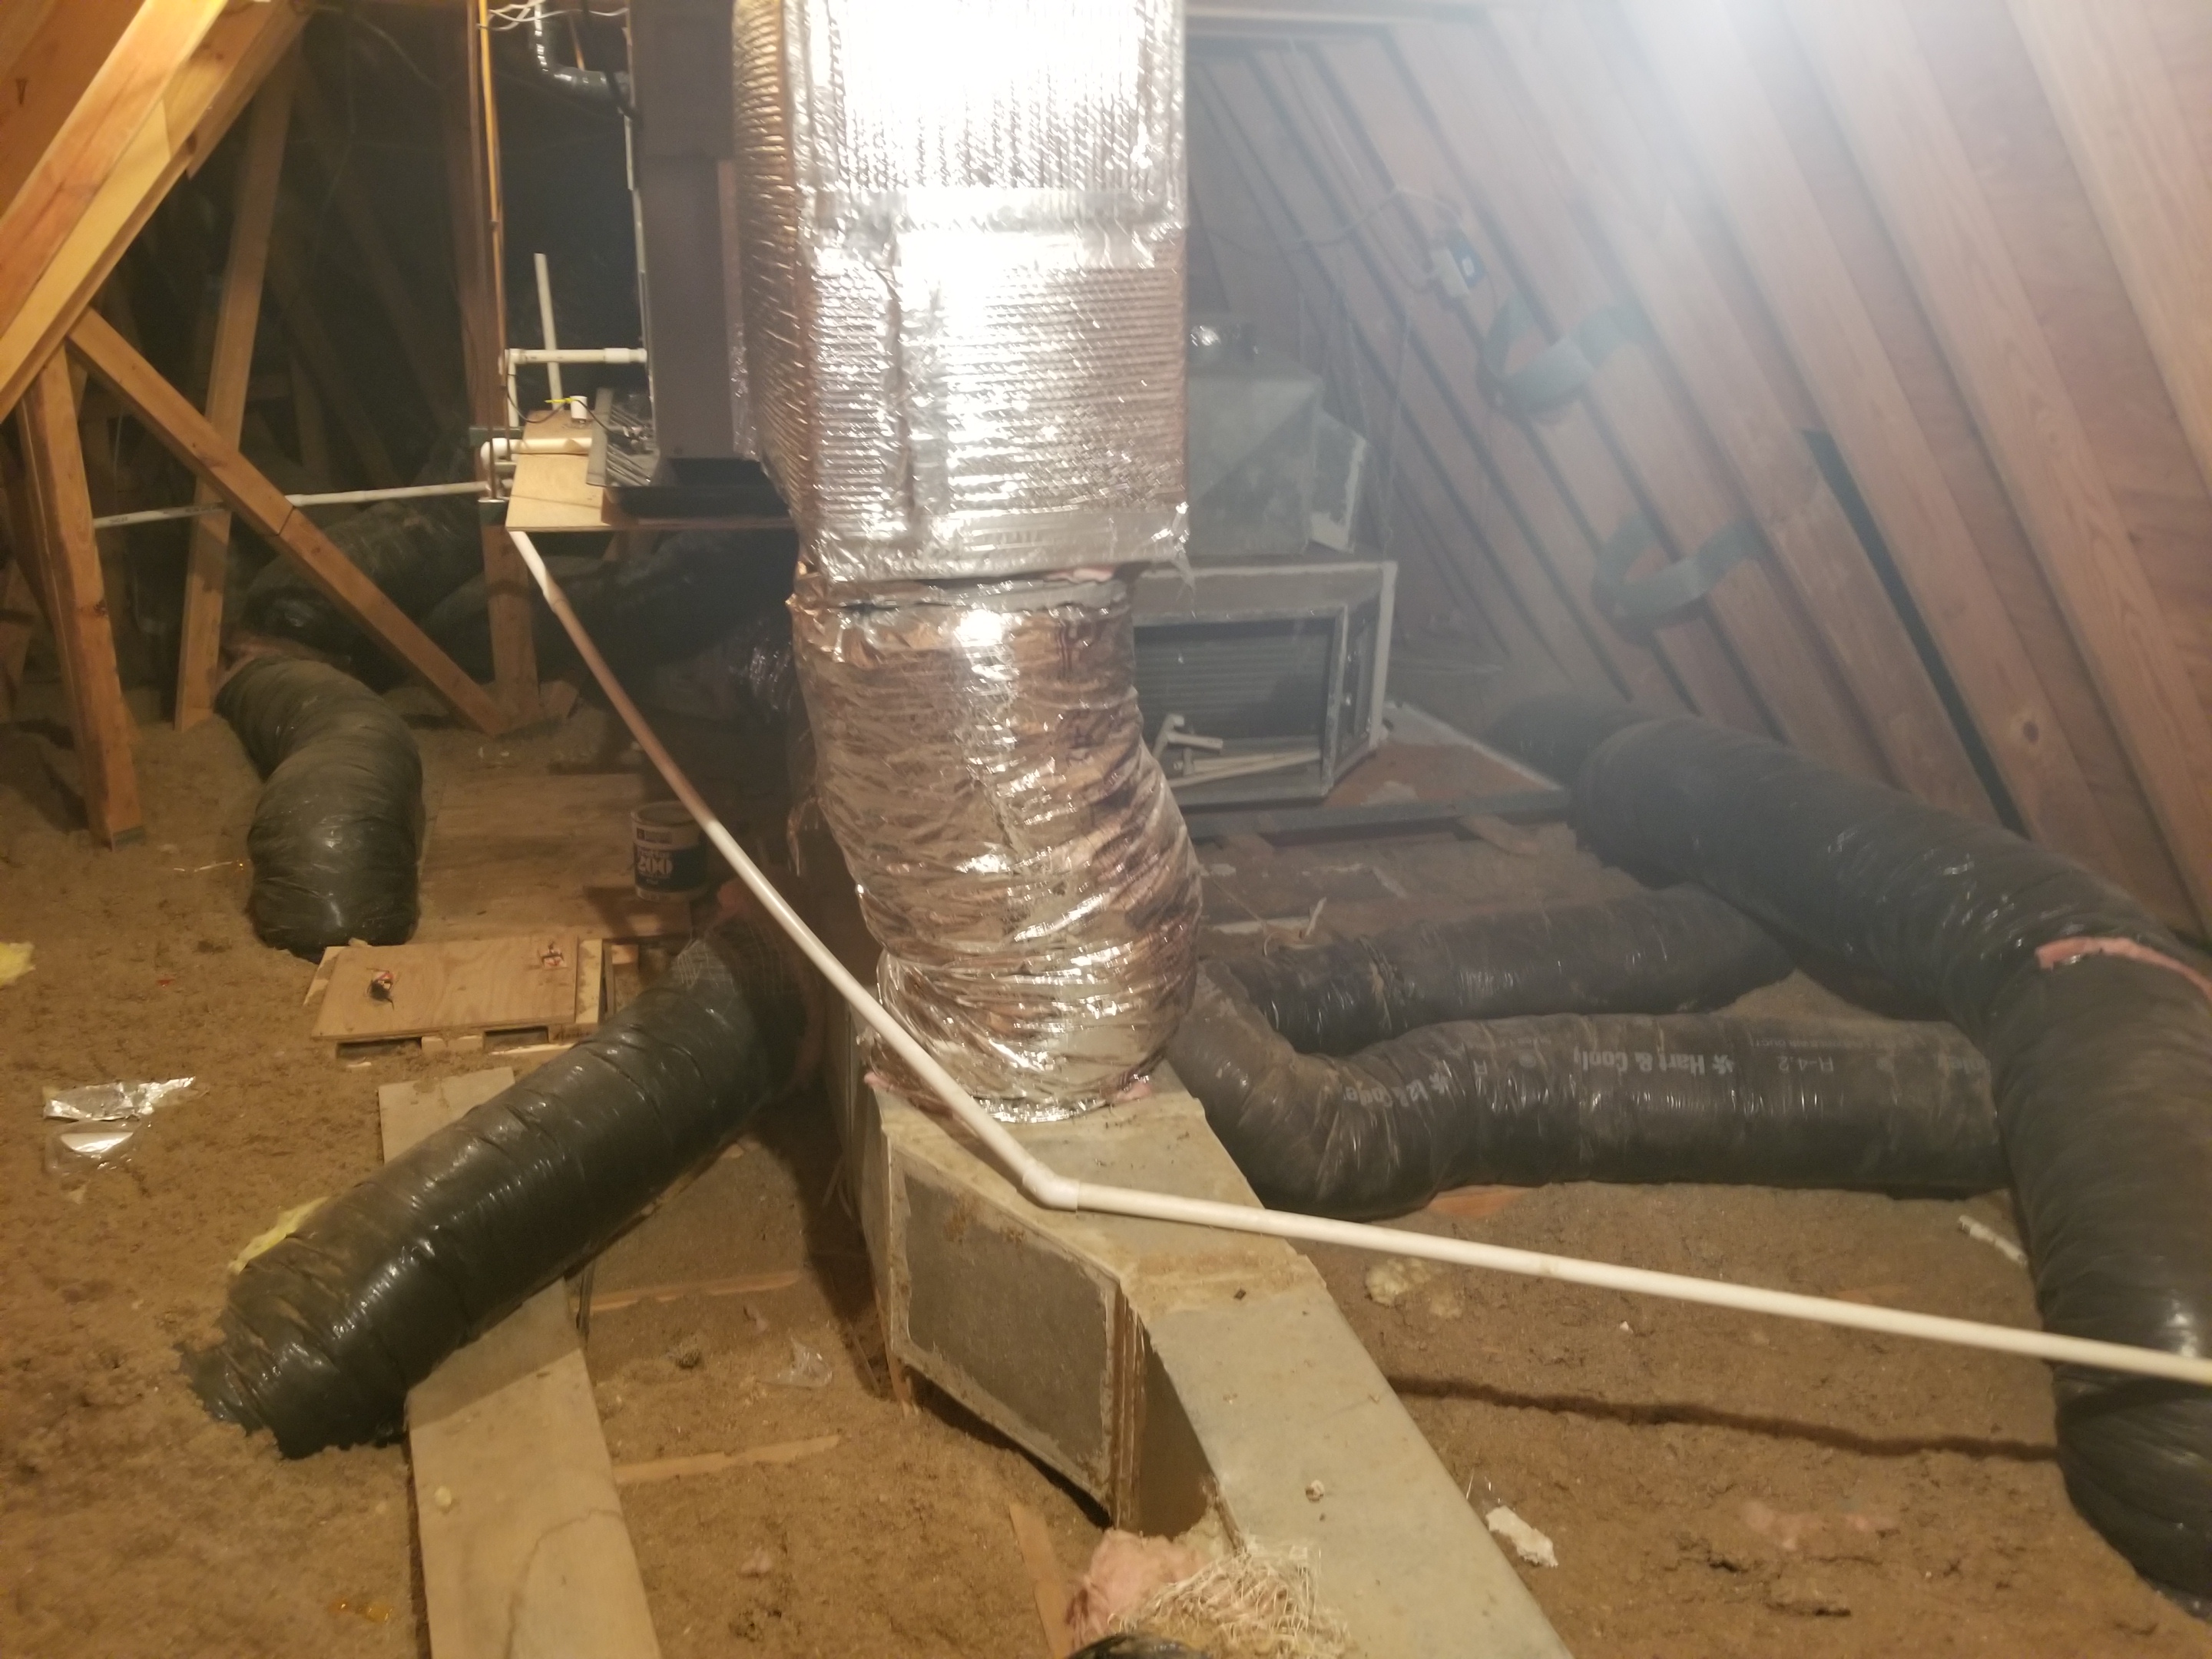 More duct work issues 